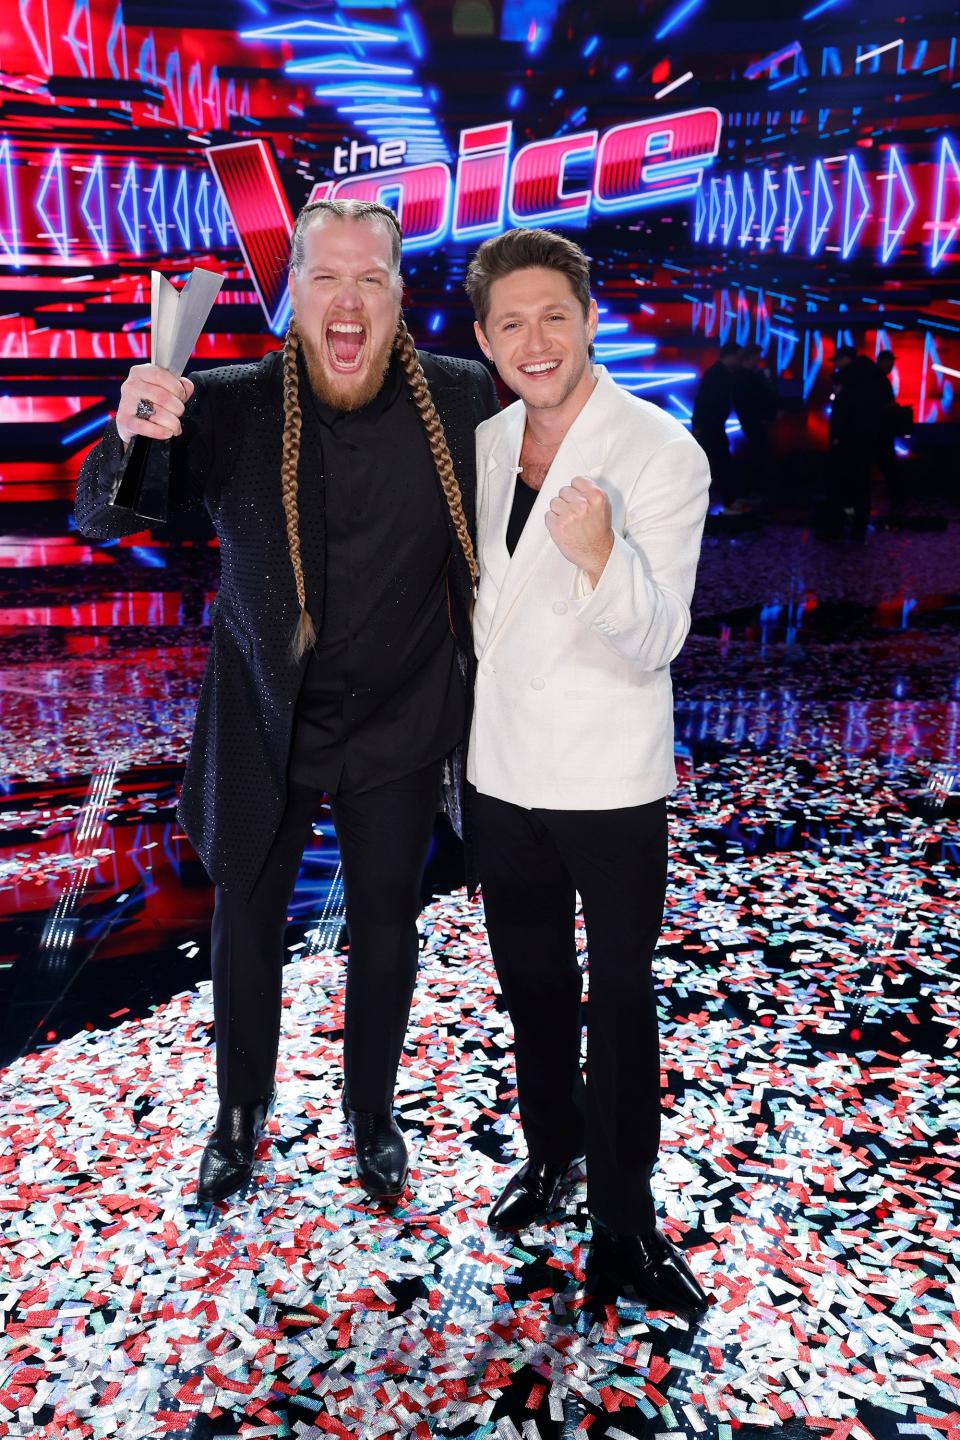 Team Niall singer Huntley, left, stands next to coach Niall Horan.